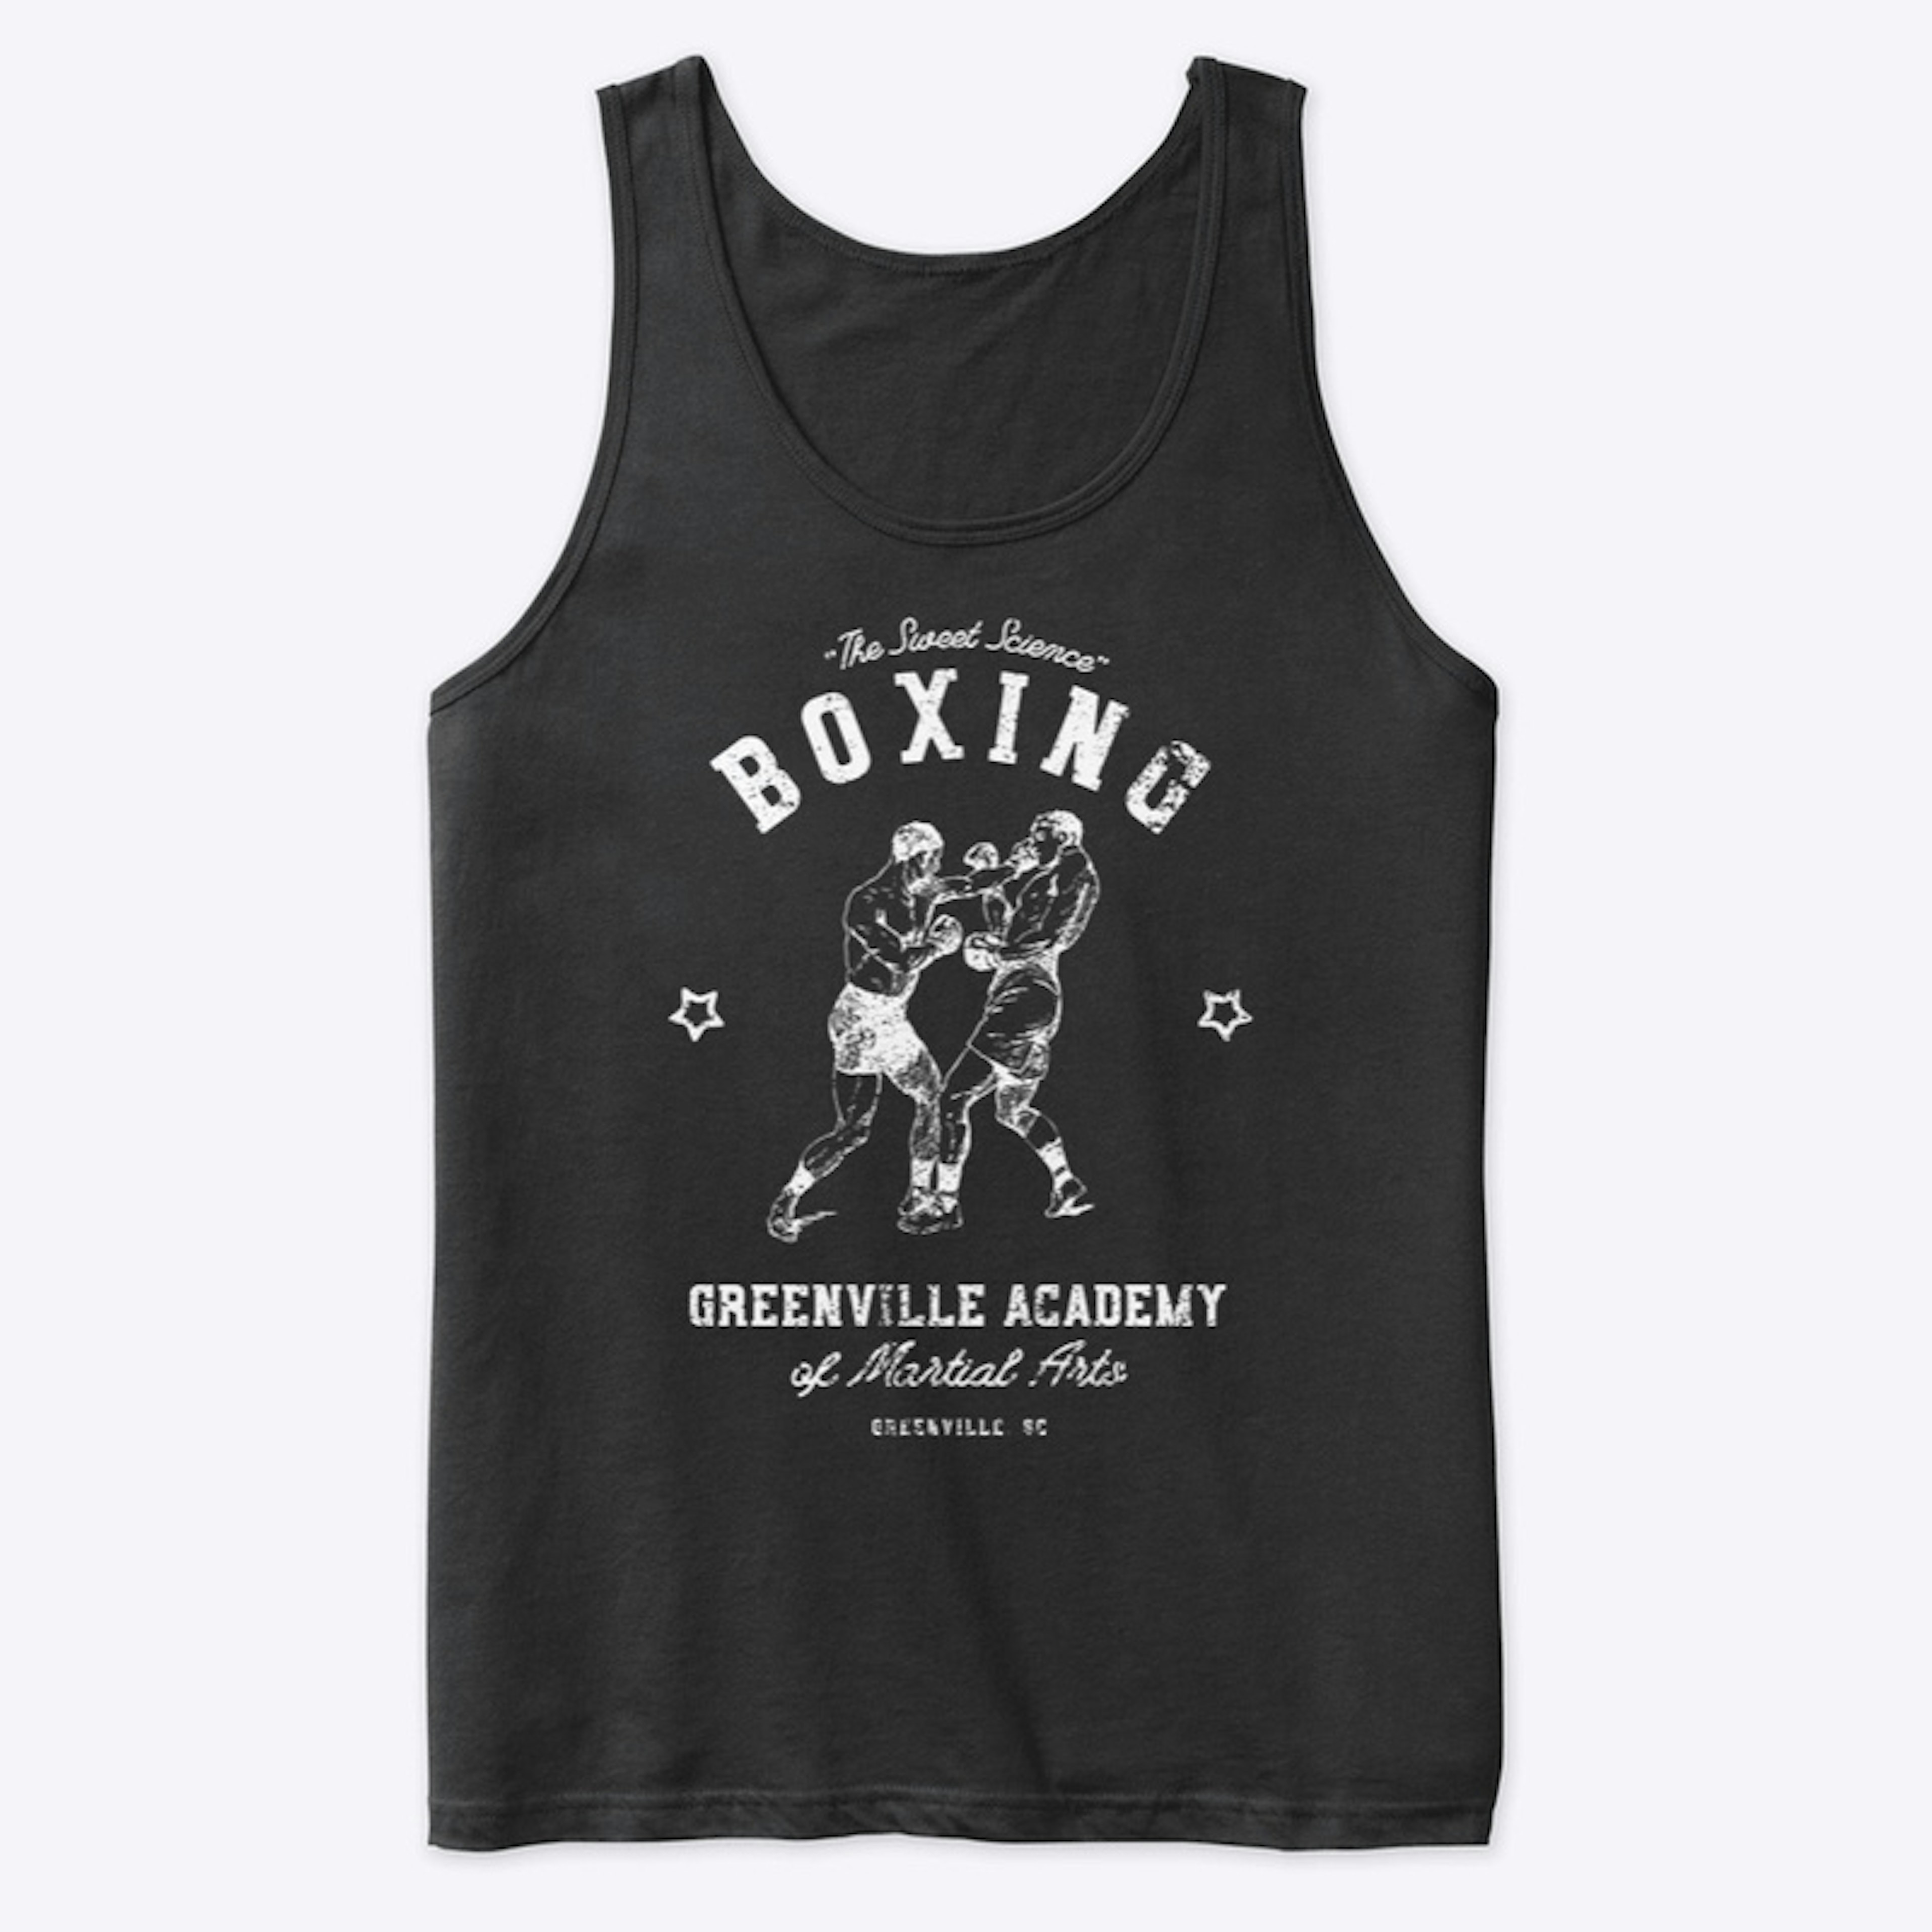 "The Sweet Science" Tank Top